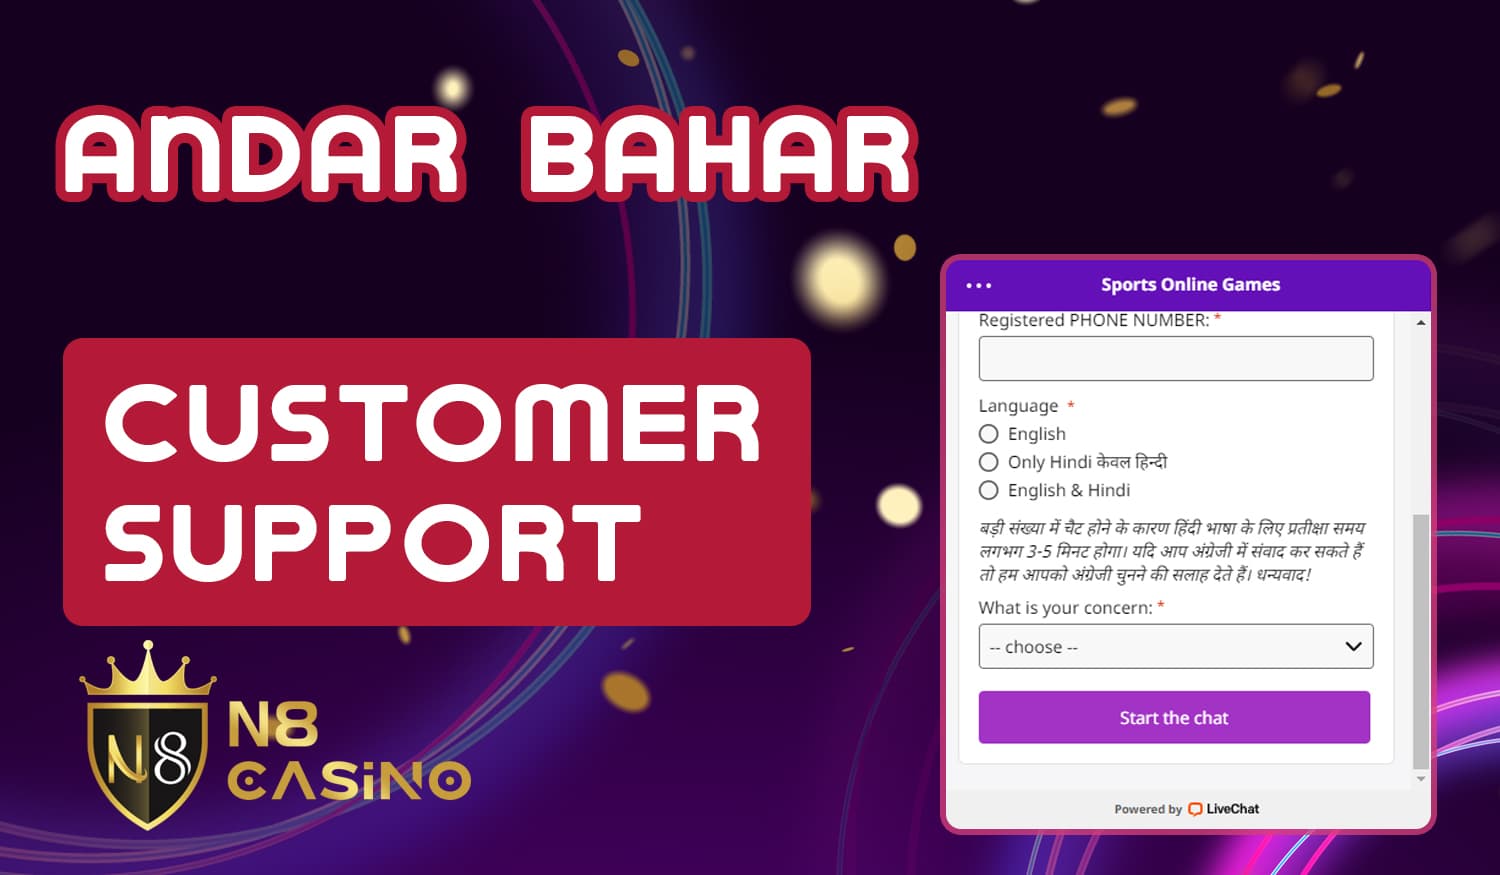 N8 Casino online support: available contacts for Indian users